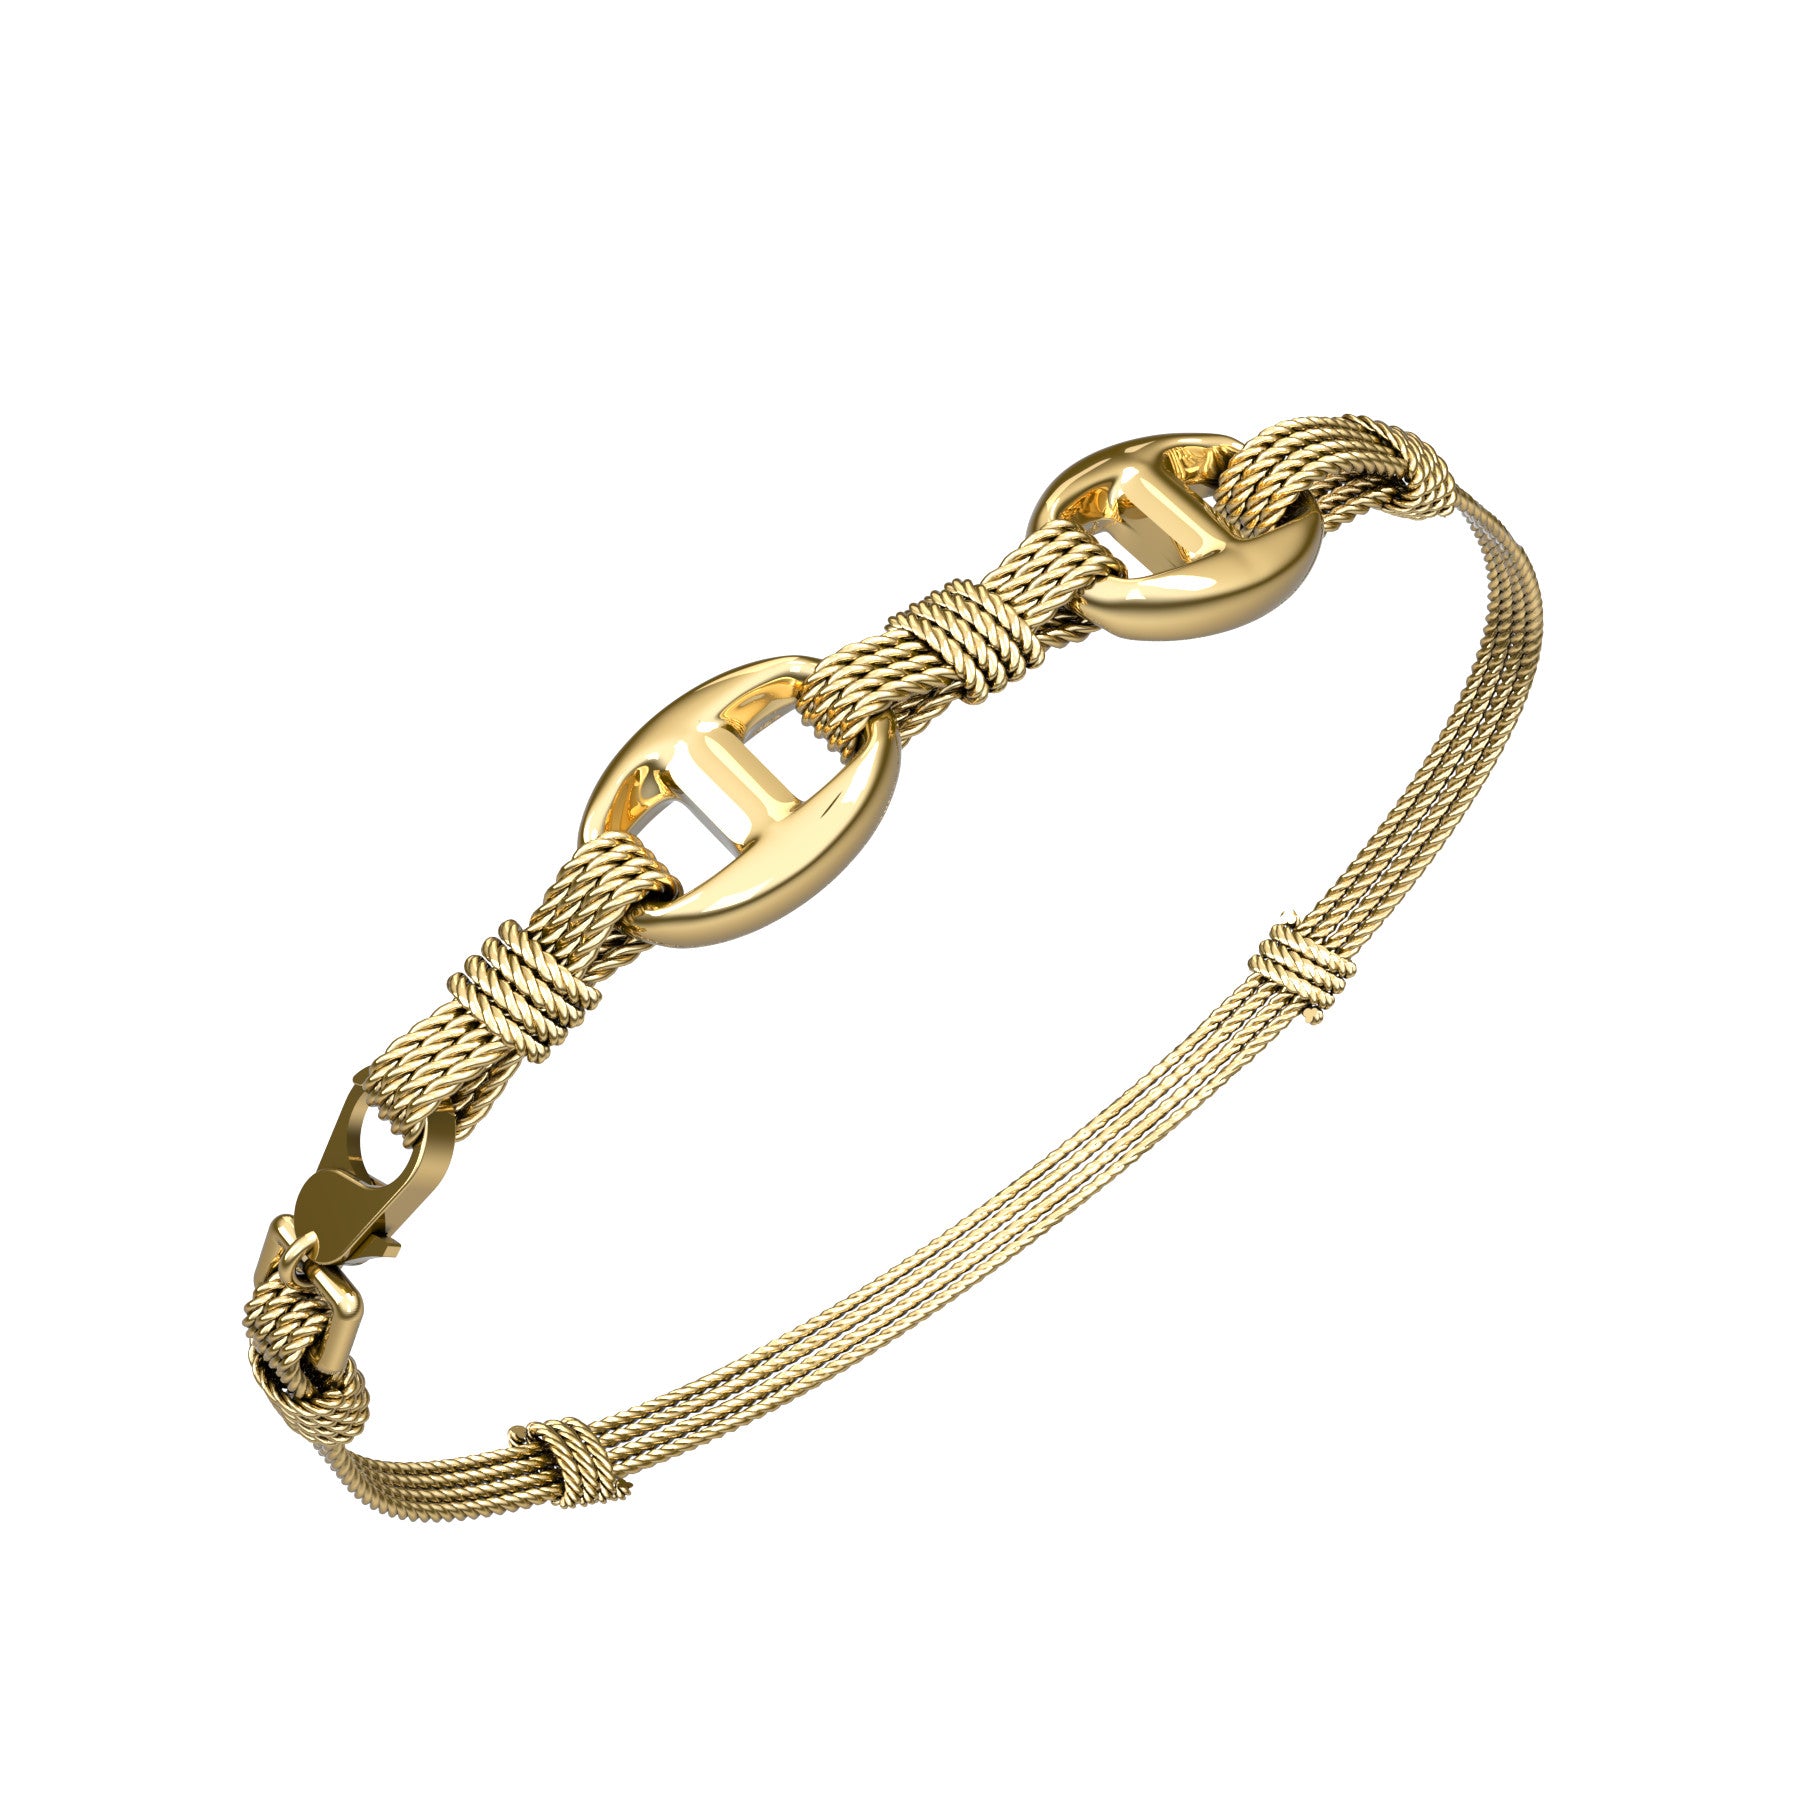 marine links and ropes bracelet, 18 K yellow god, weight about 14,50 g (0,51 oz),  width 15 mm